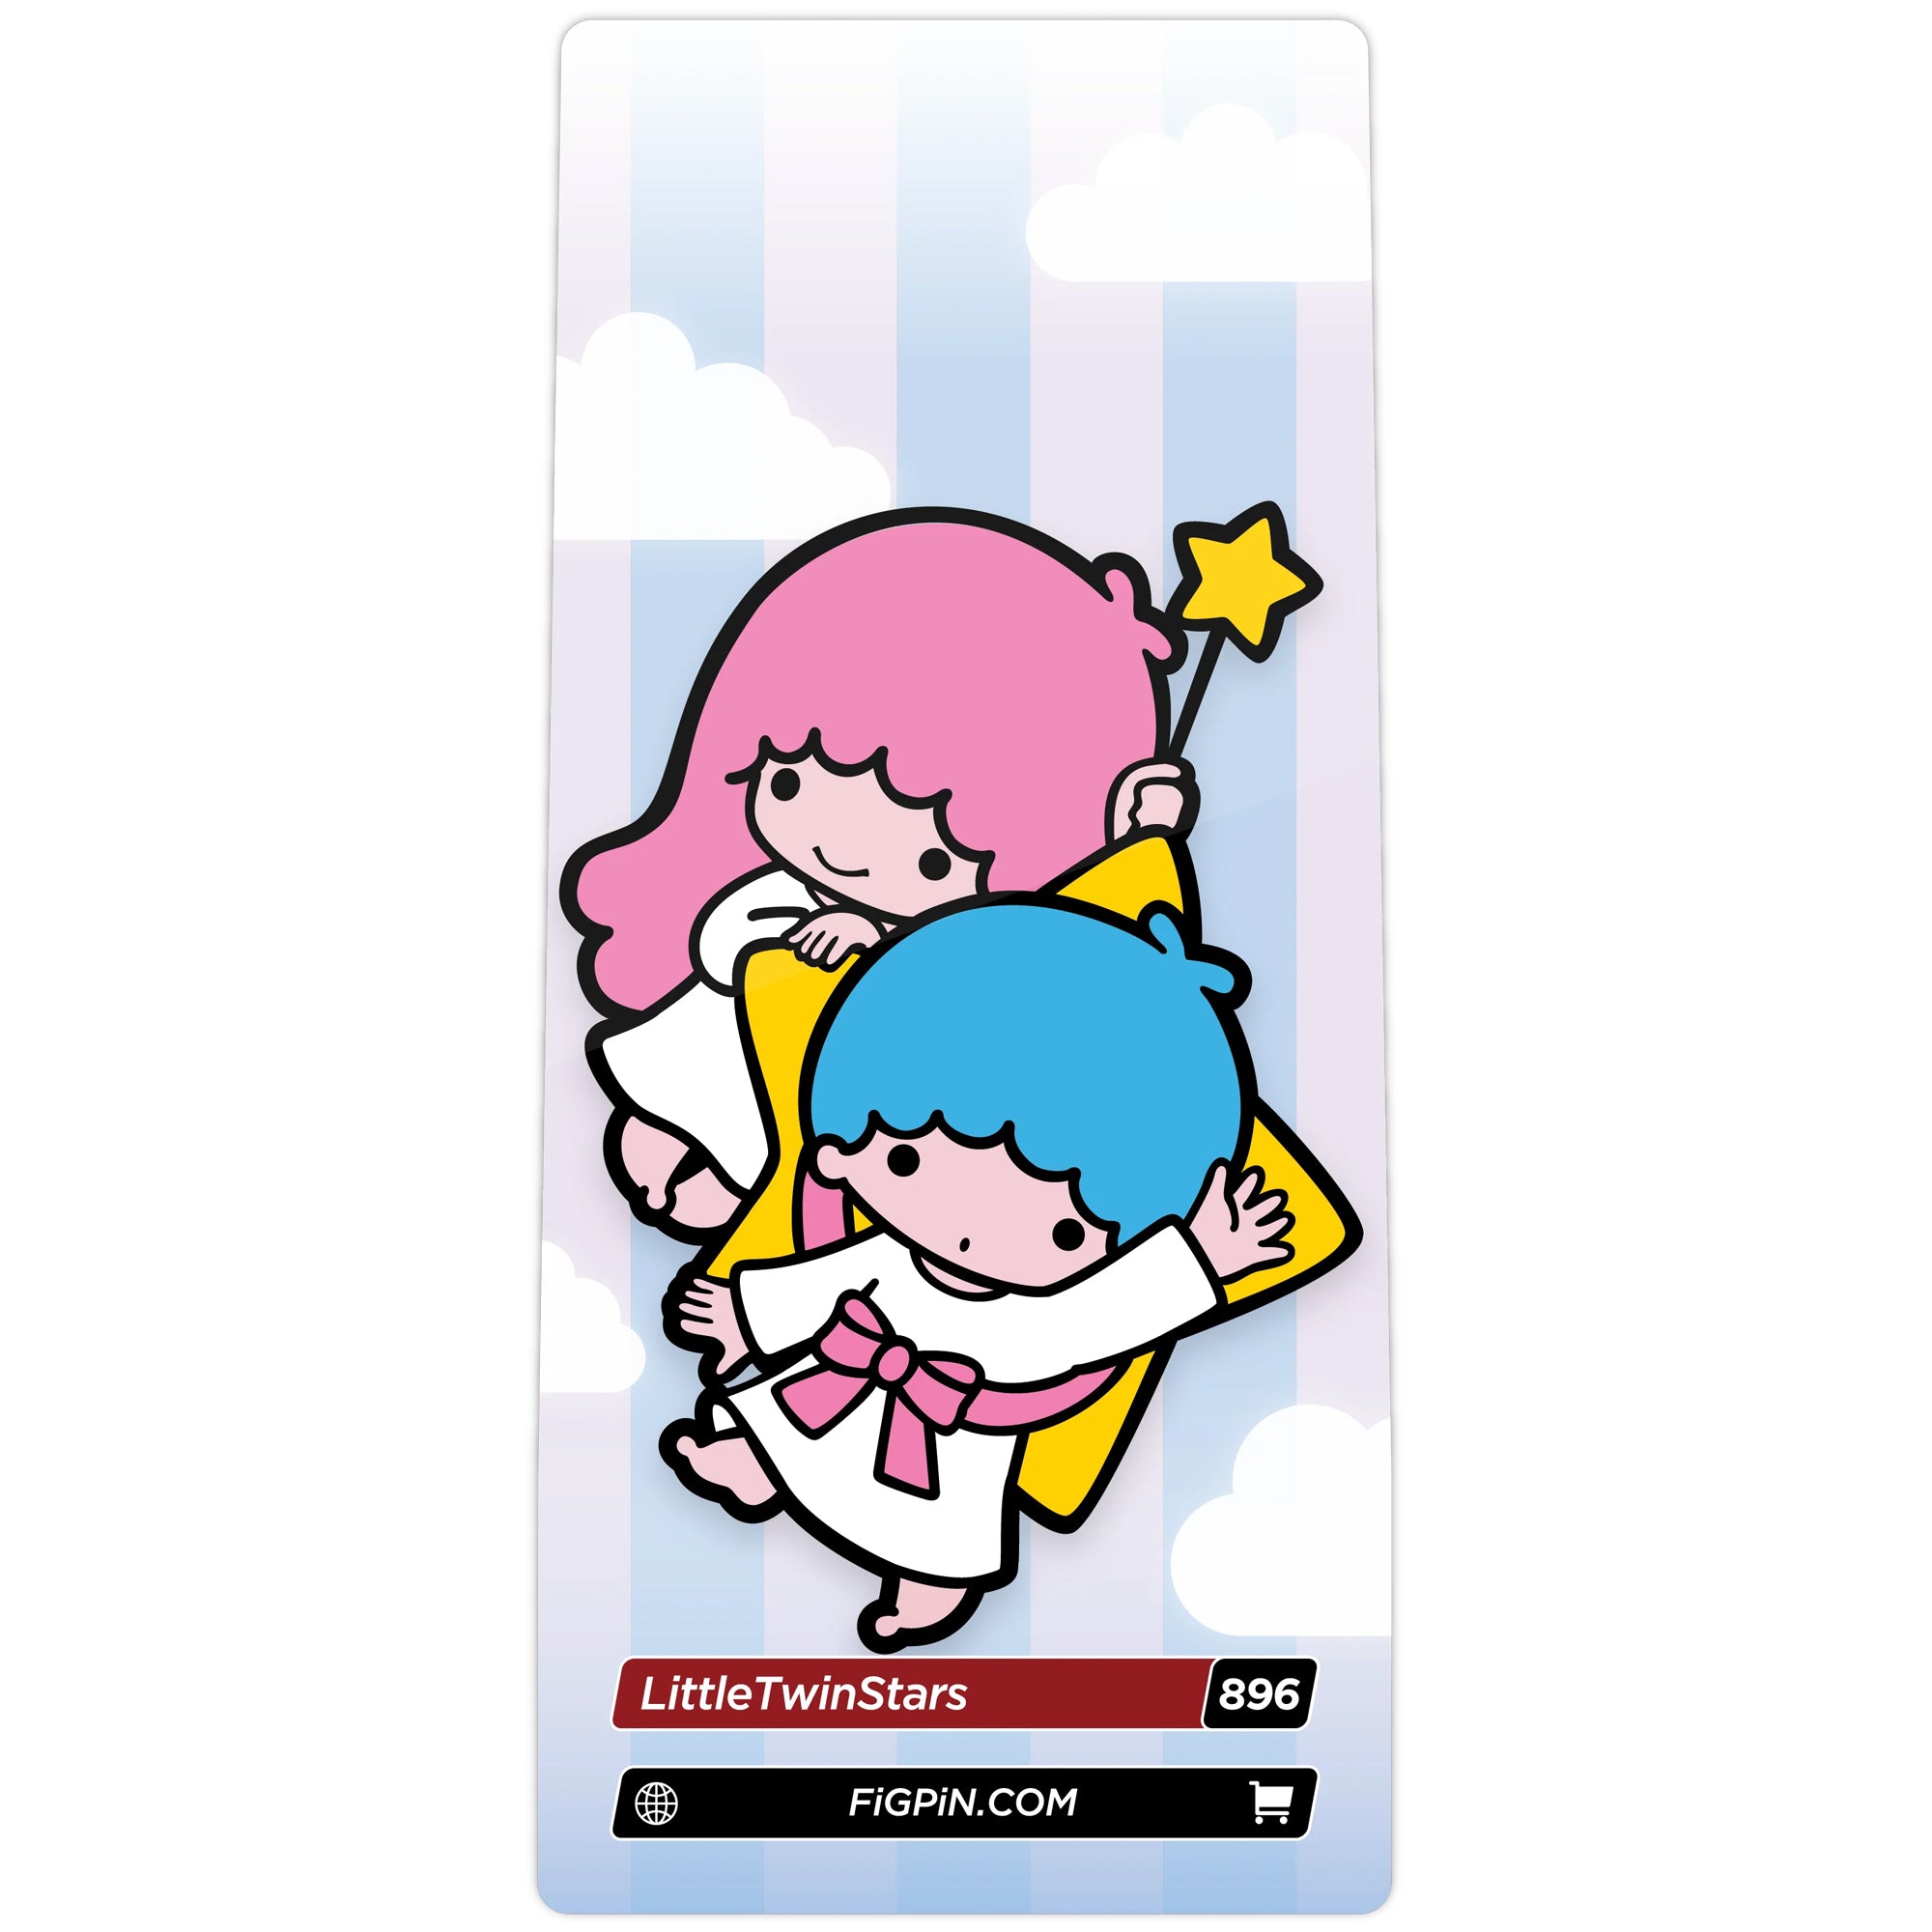 Sanrio Hello Kitty Little Twin Stars Limited Edition 3" Collectible Pin #896